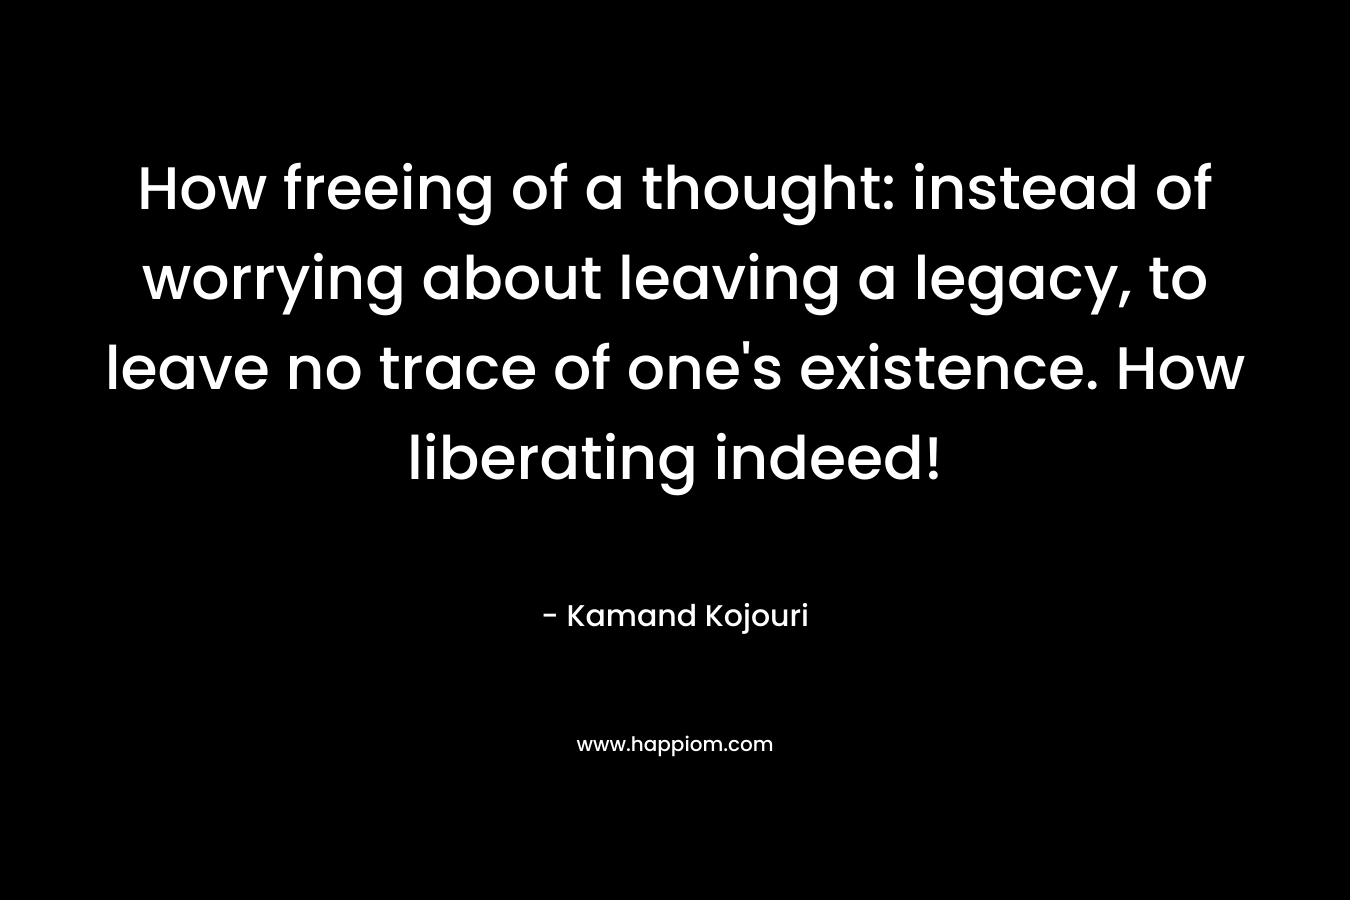 How freeing of a thought: instead of worrying about leaving a legacy, to leave no trace of one's existence. How liberating indeed!